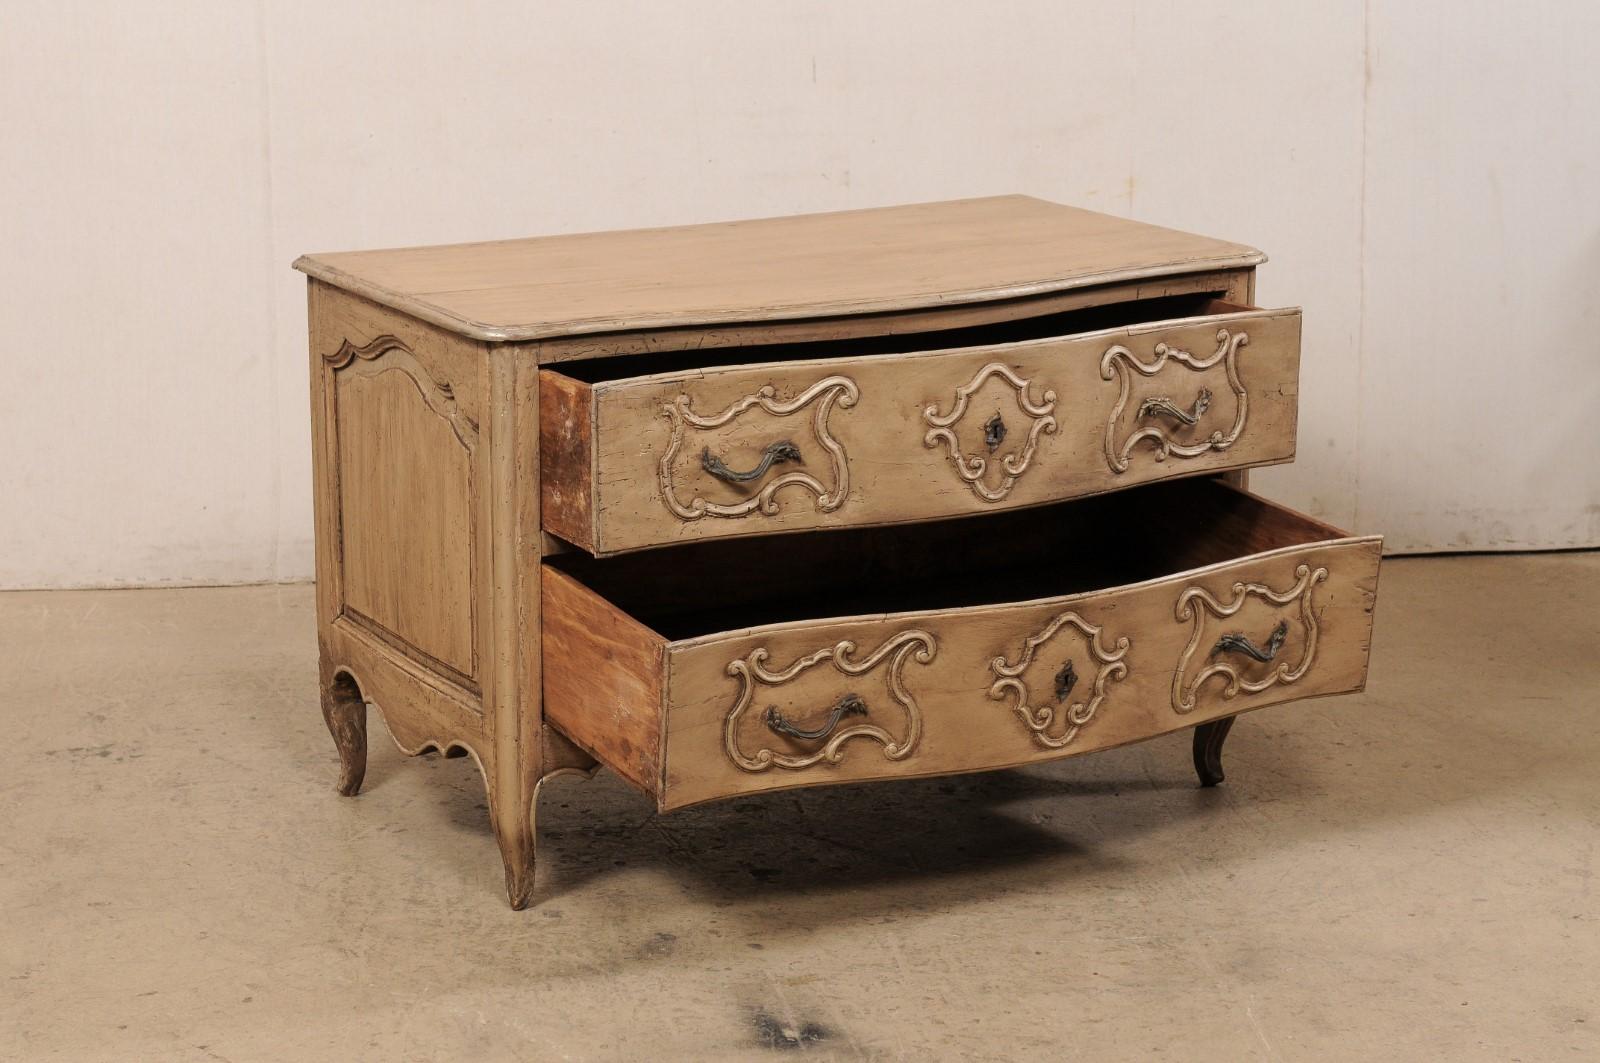 19th Century Late 18th C. Italian Serpentine Carved-Wood Chest For Sale